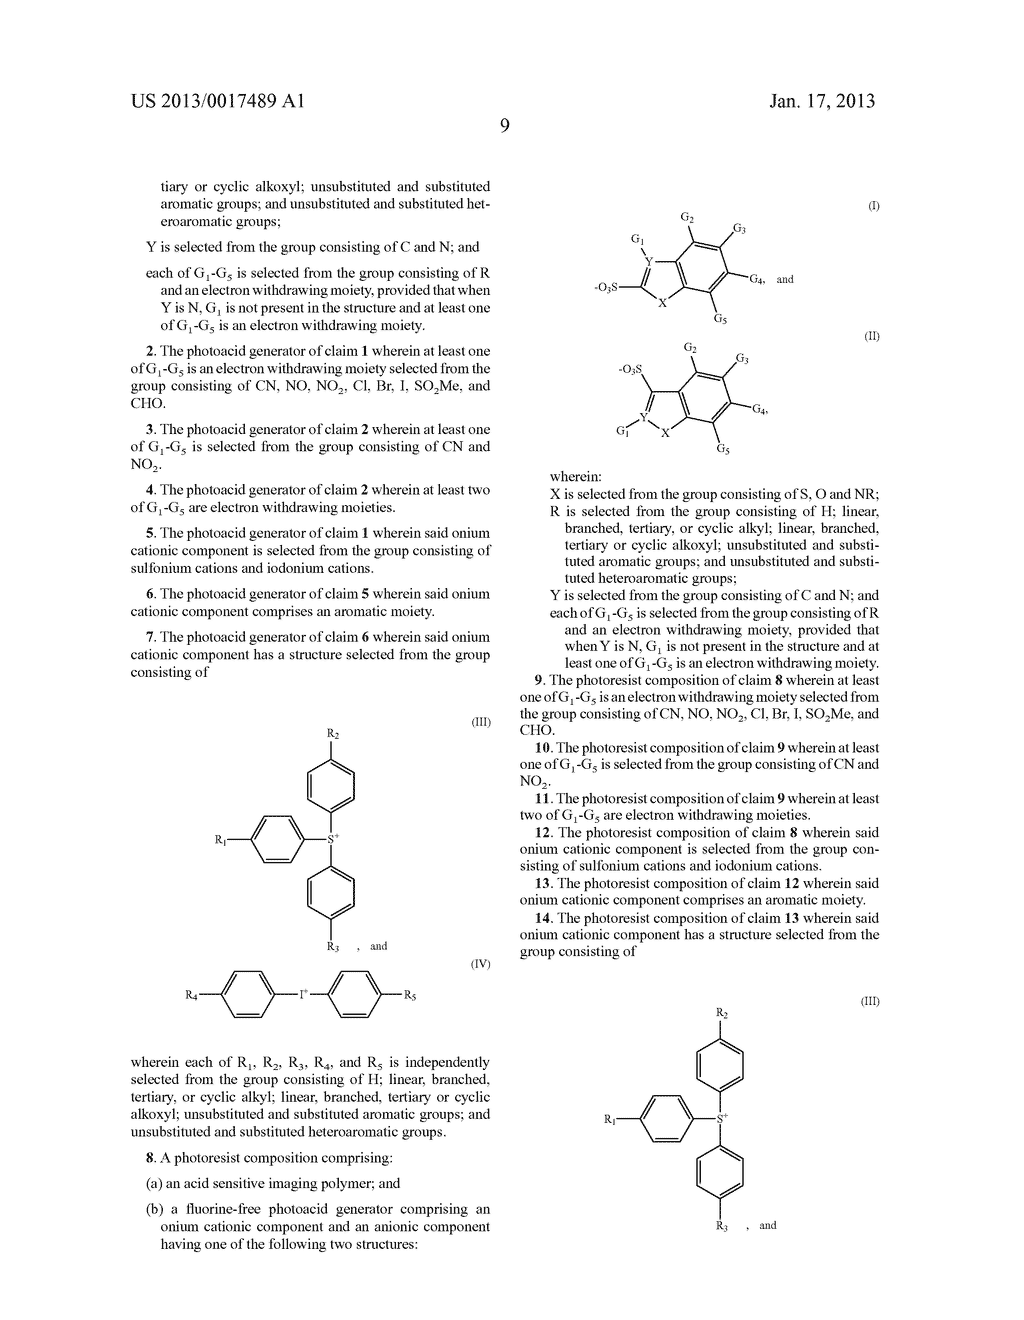 FLUORINE-FREE FUSED RING HETEROAROMATIC PHOTOACID GENERATORS AND RESIST     COMPOSITIONS CONTAINING THE SAME - diagram, schematic, and image 10